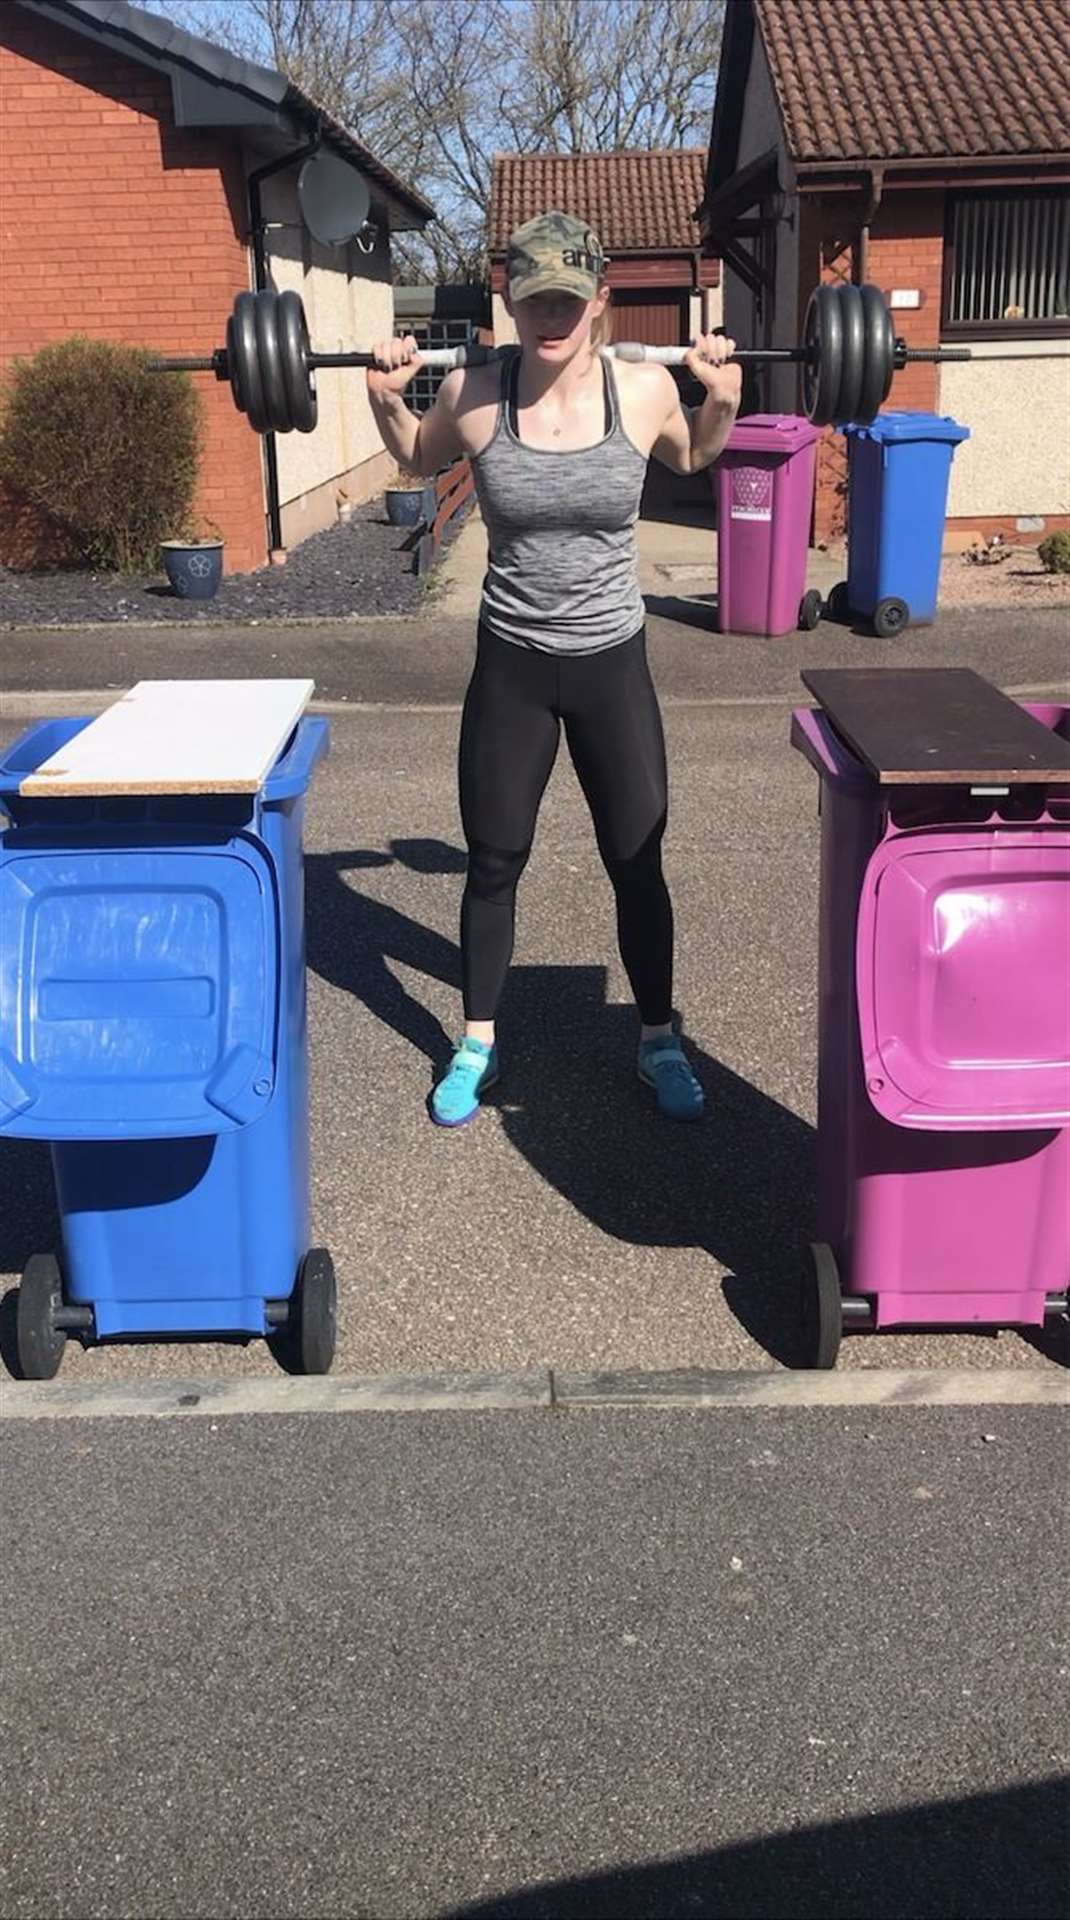 Moray Council's recycling wheelie bins were initially a help in Lauren Bell's weight training regime.